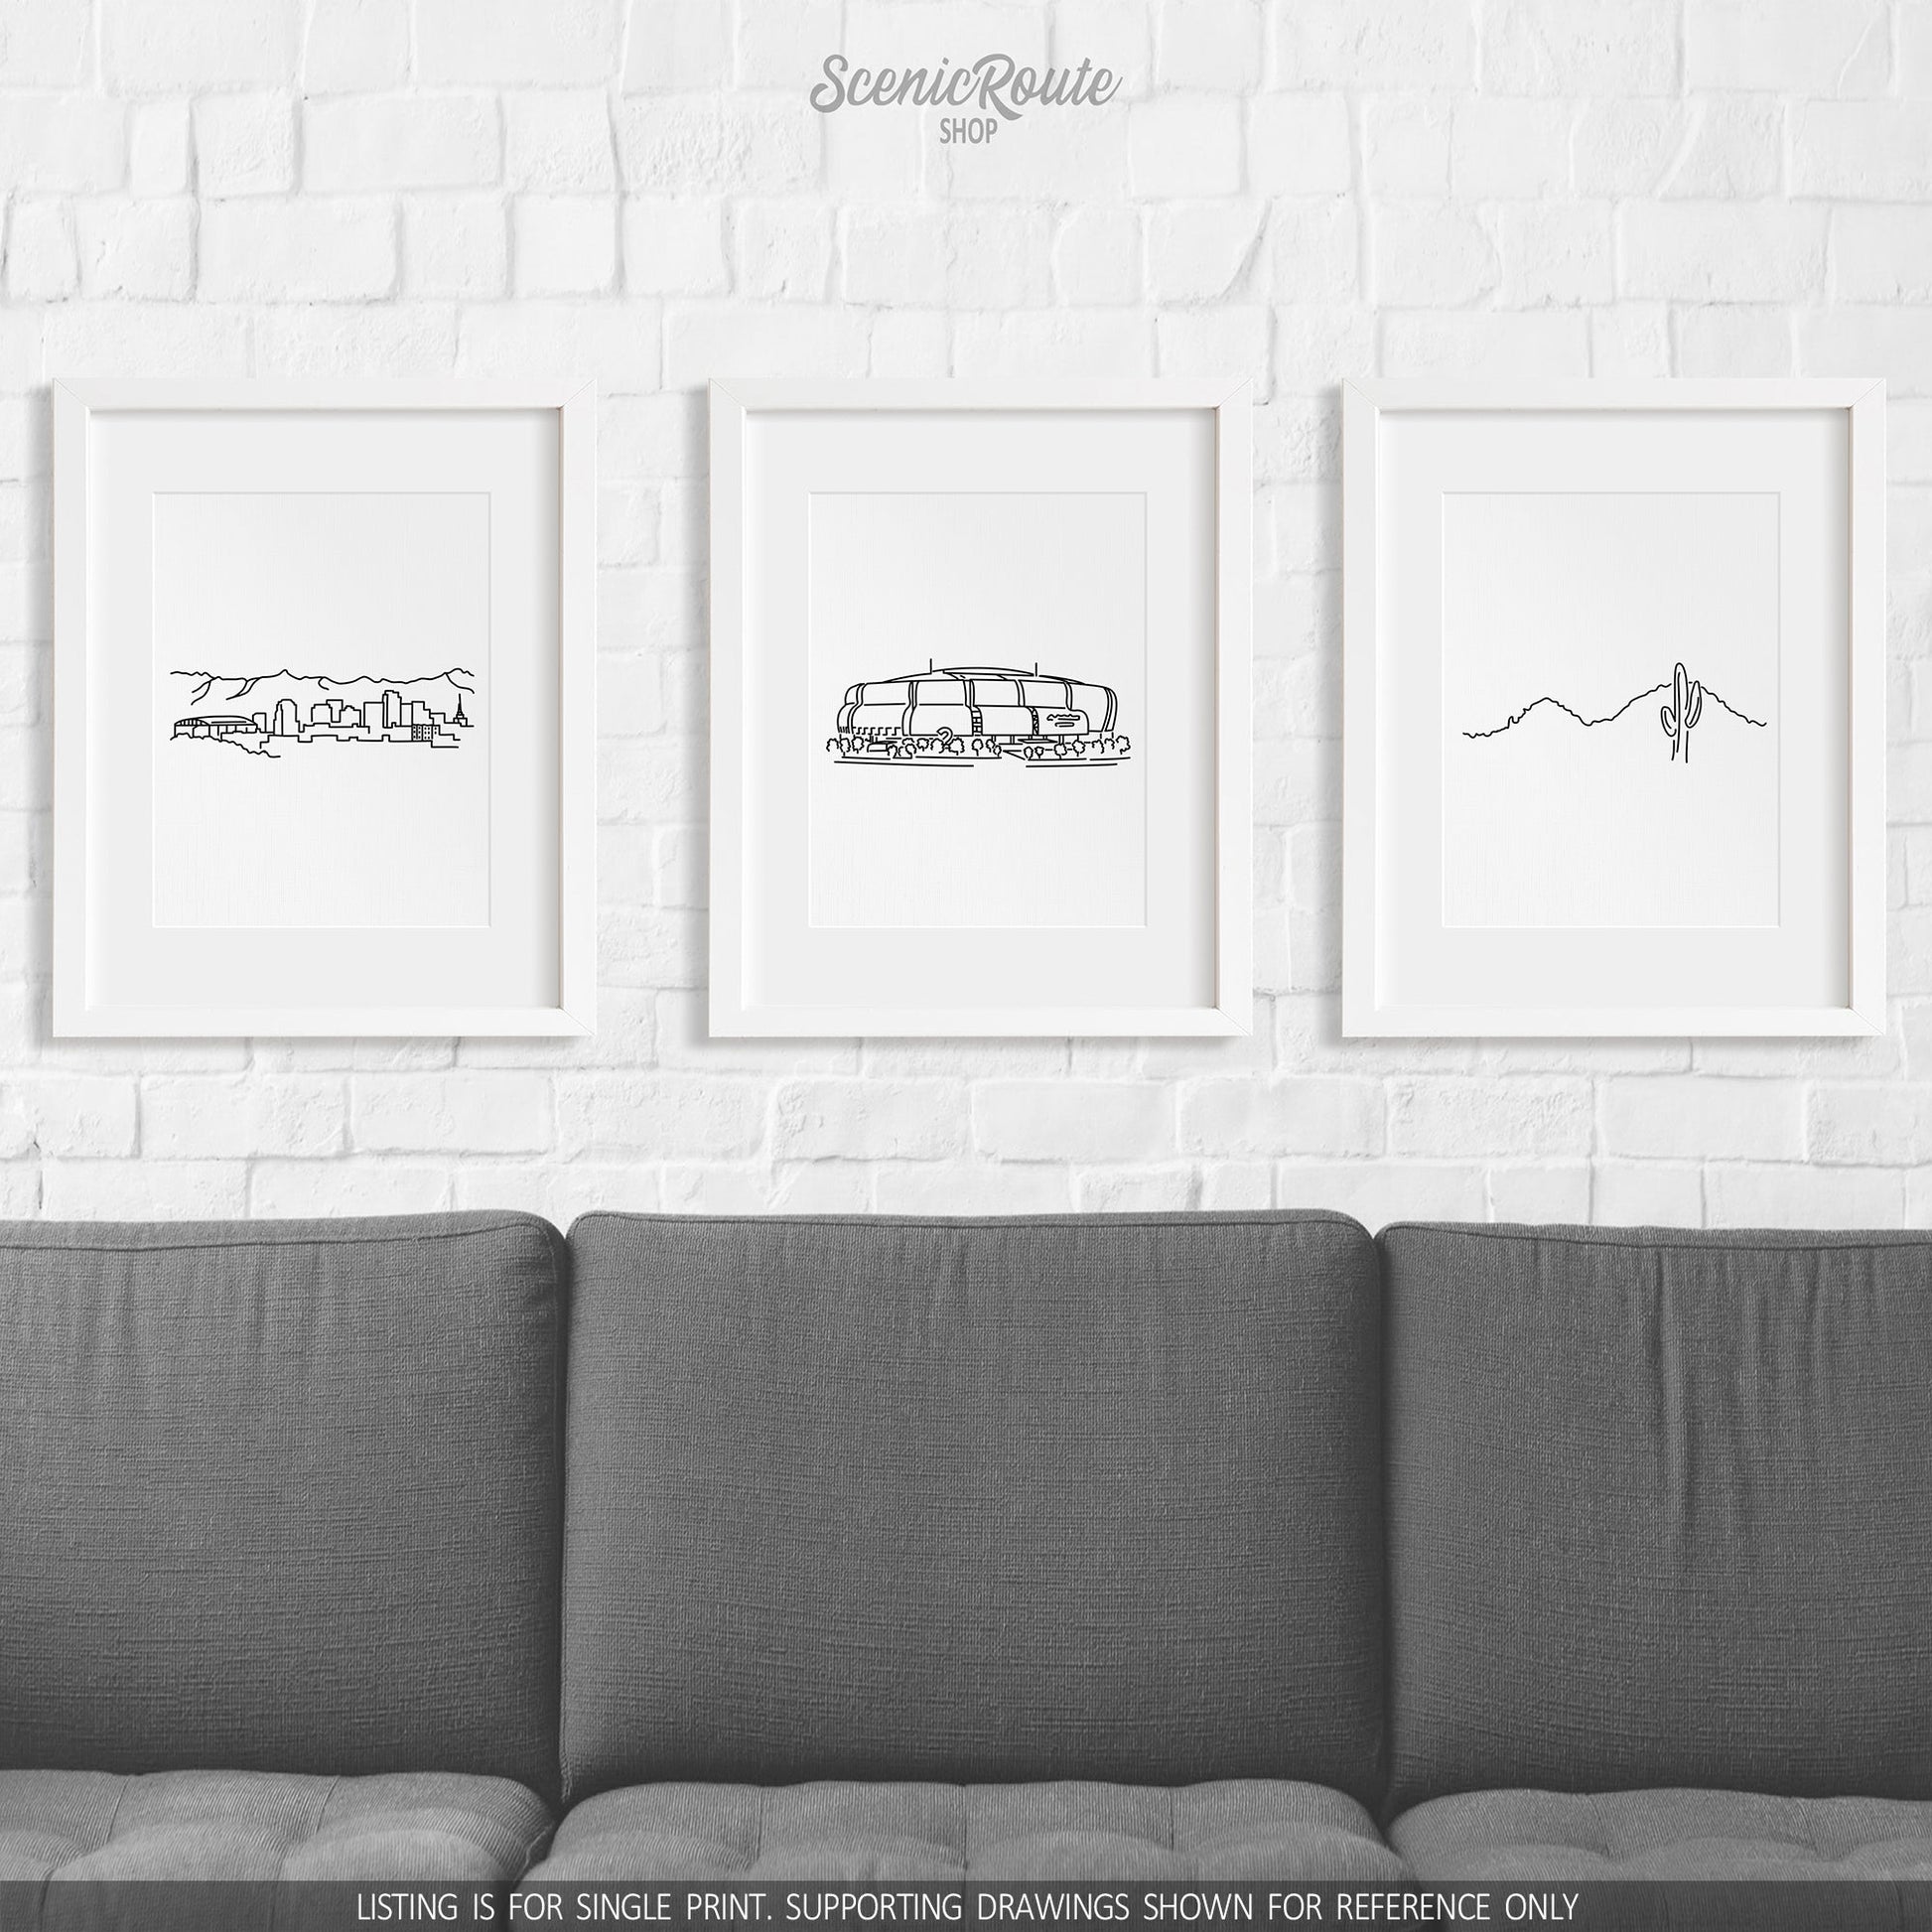 A group of three framed drawings on a wall above a couch. The line art drawings include the Phoenix Skyline, Cardinals Stadium, and Camelback Mountain